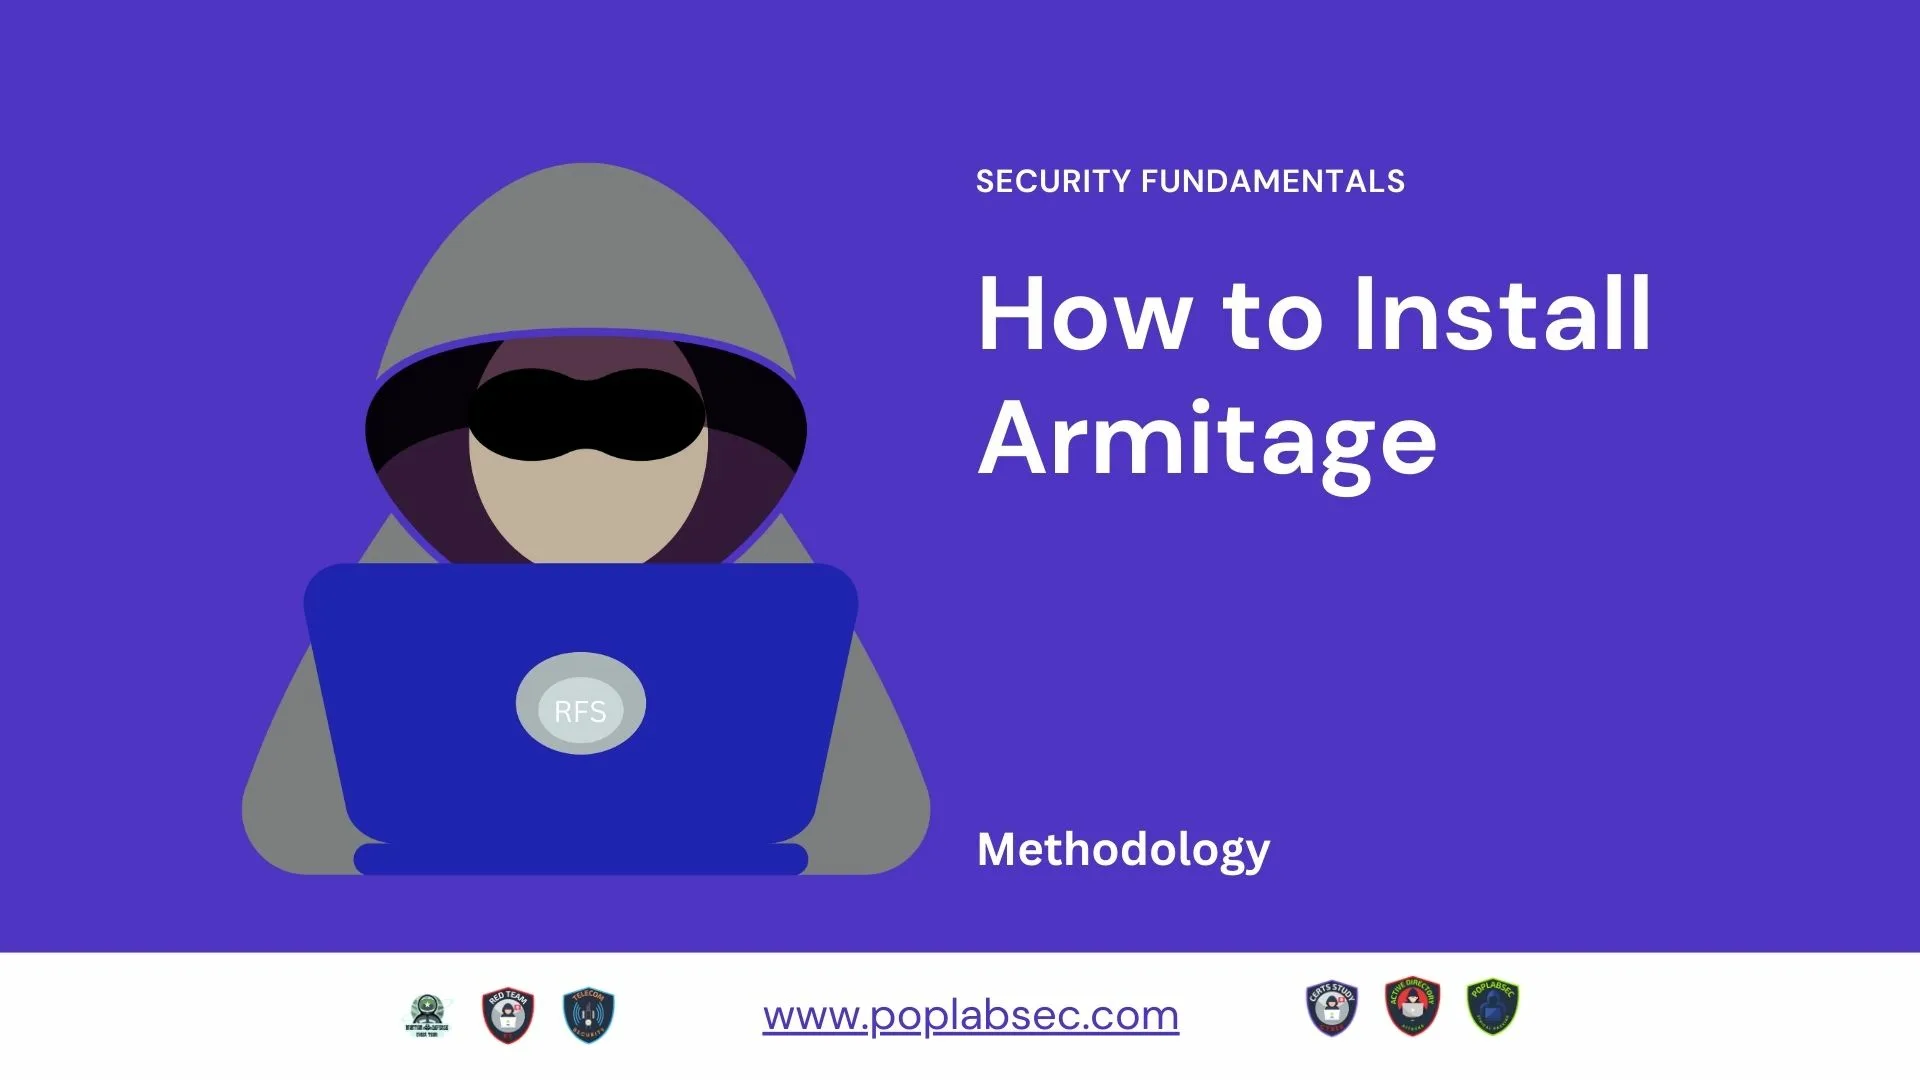 How to install Armitage